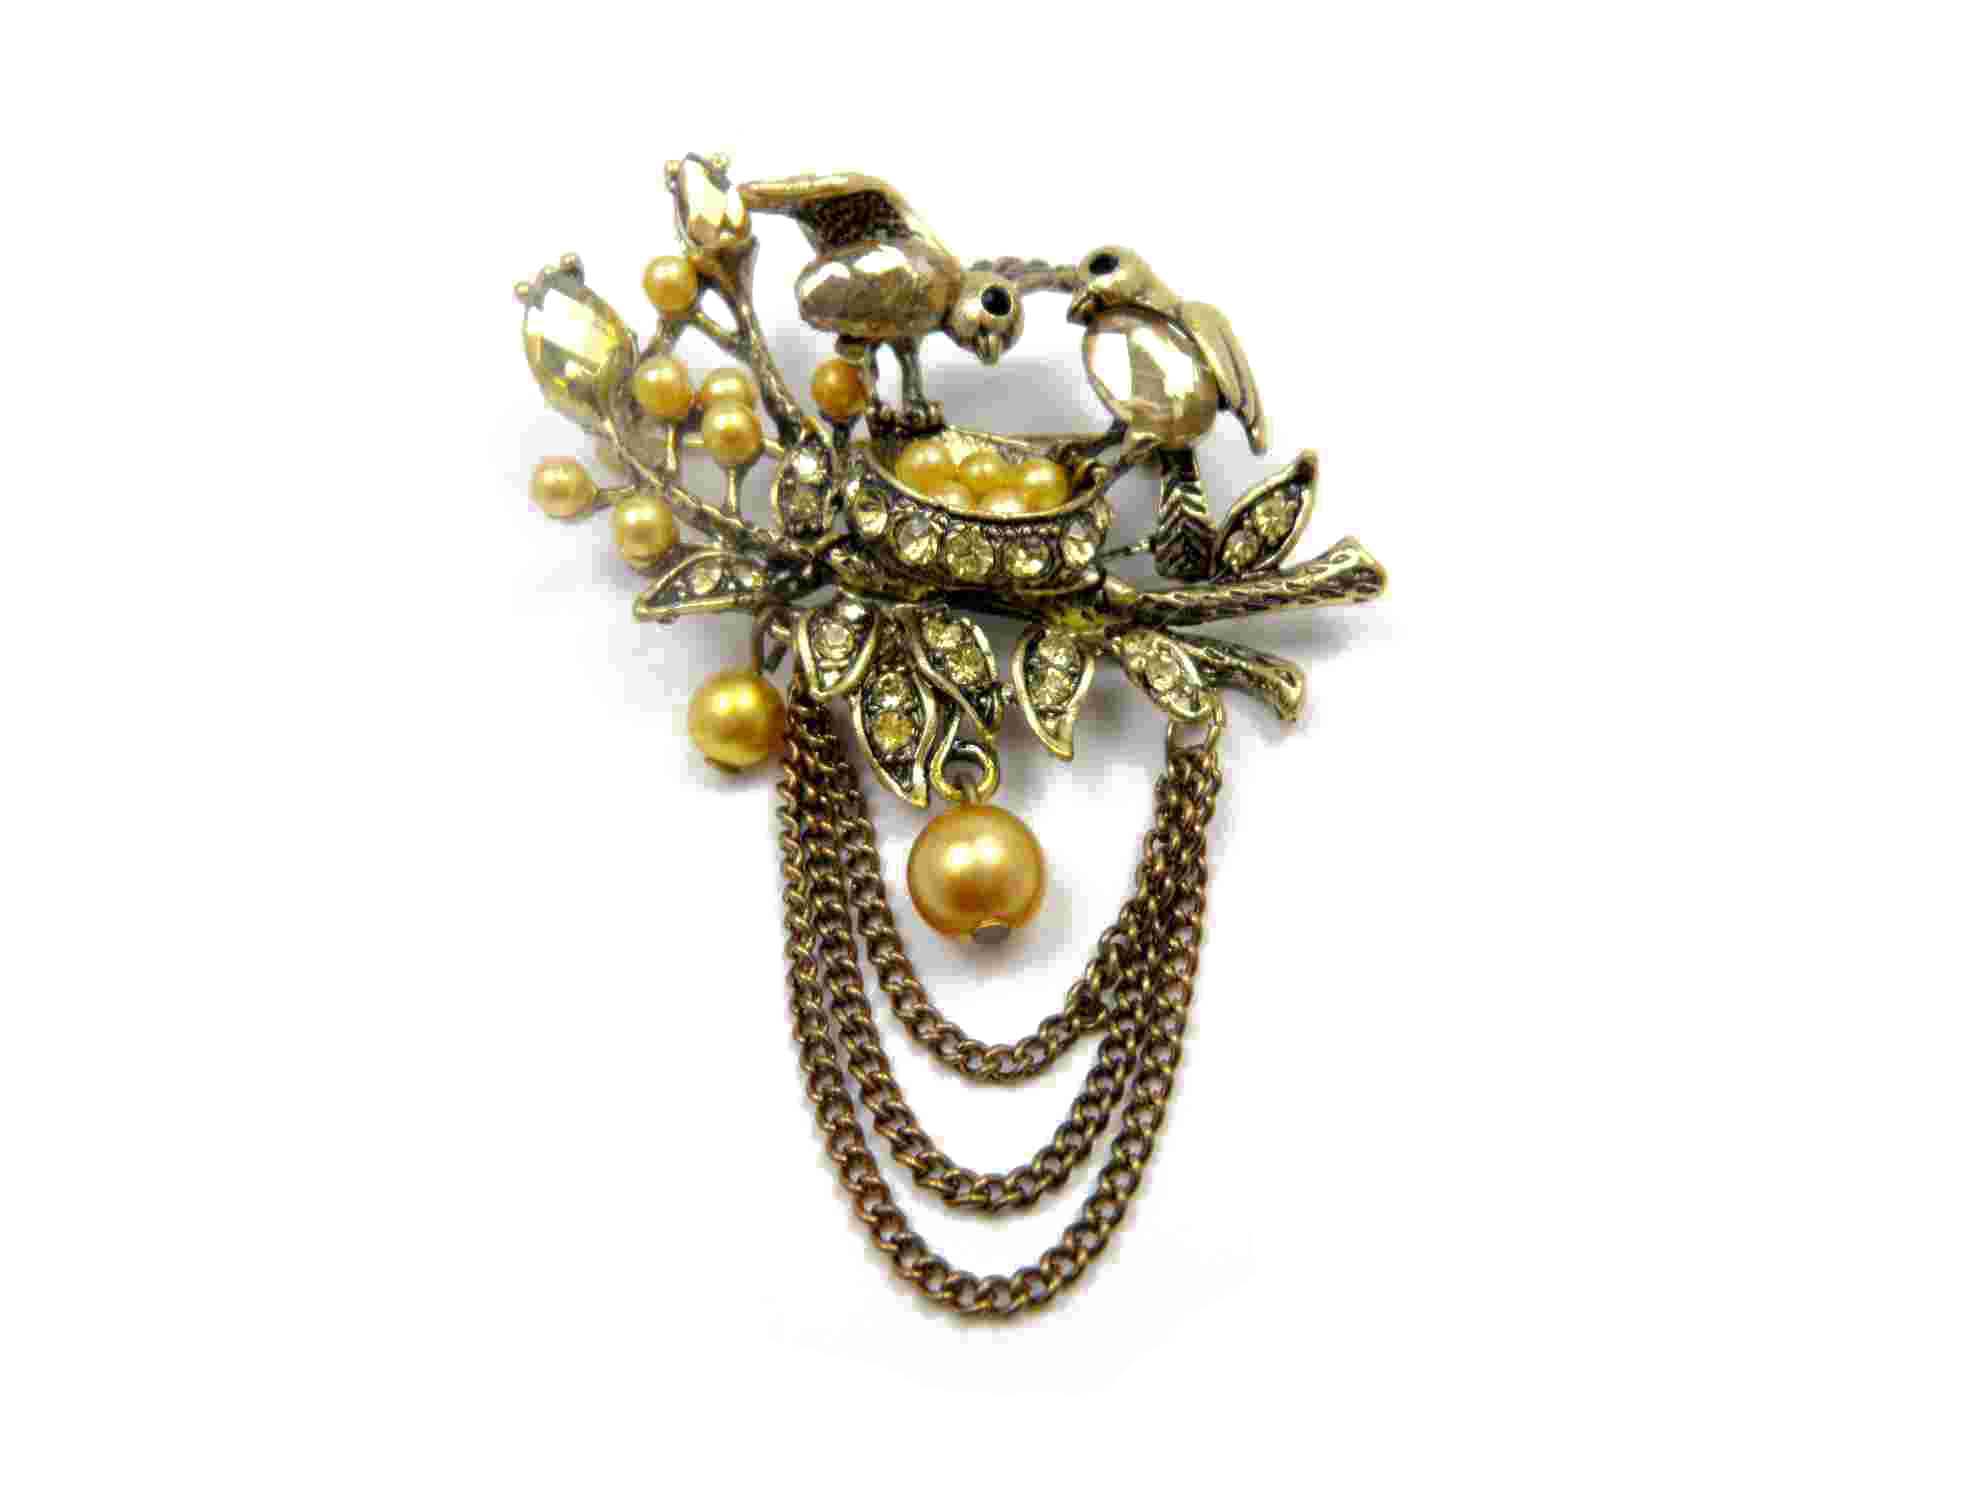 Fashionable bird brooch, made of zinc alloy, glass and plastic, available in various designs 